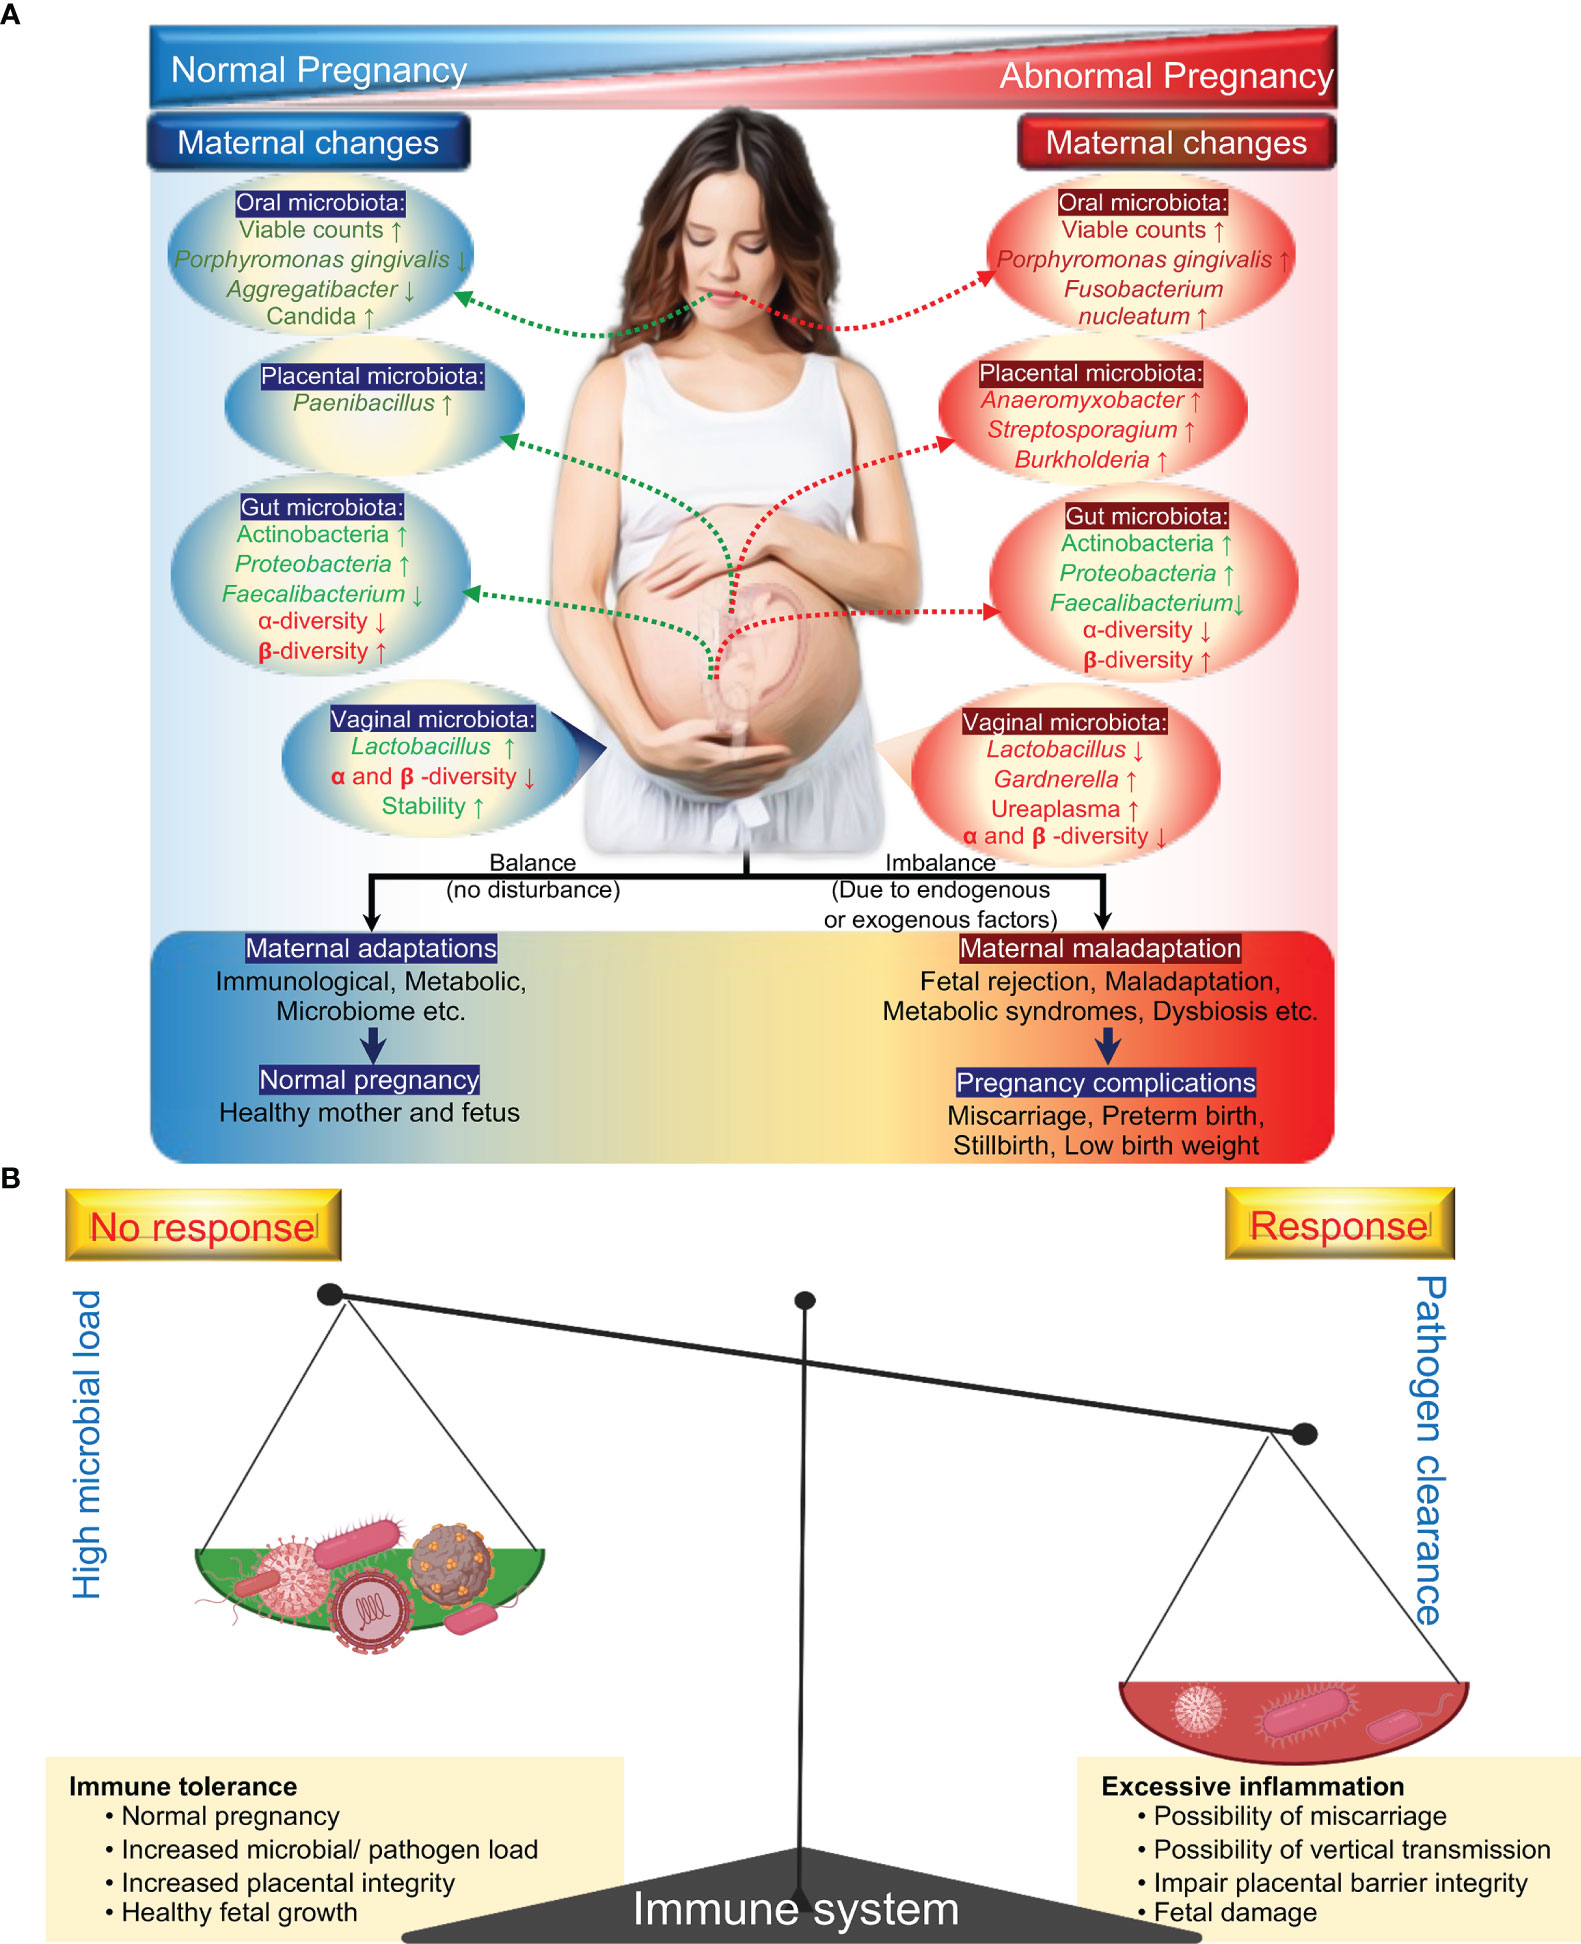 Prevalence and course of pregnancy symptoms using self-reported